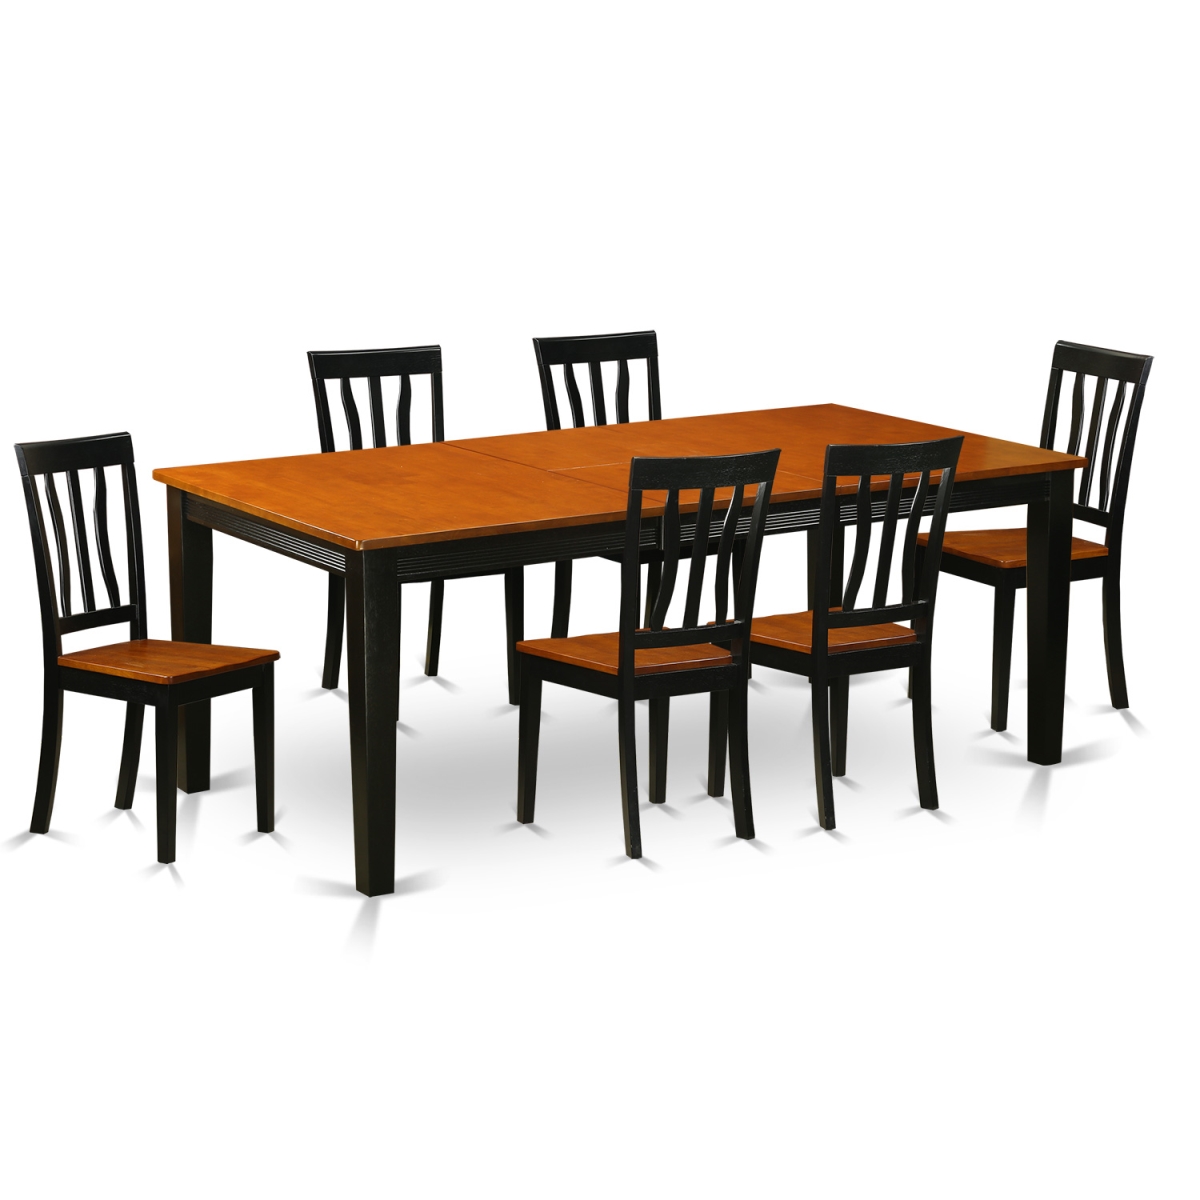 QUAN7-BCH-W Wood Seat Dining Set - Table with 6 Wooden Chair, Black & Cherry - 7 Piece -  East West Furniture